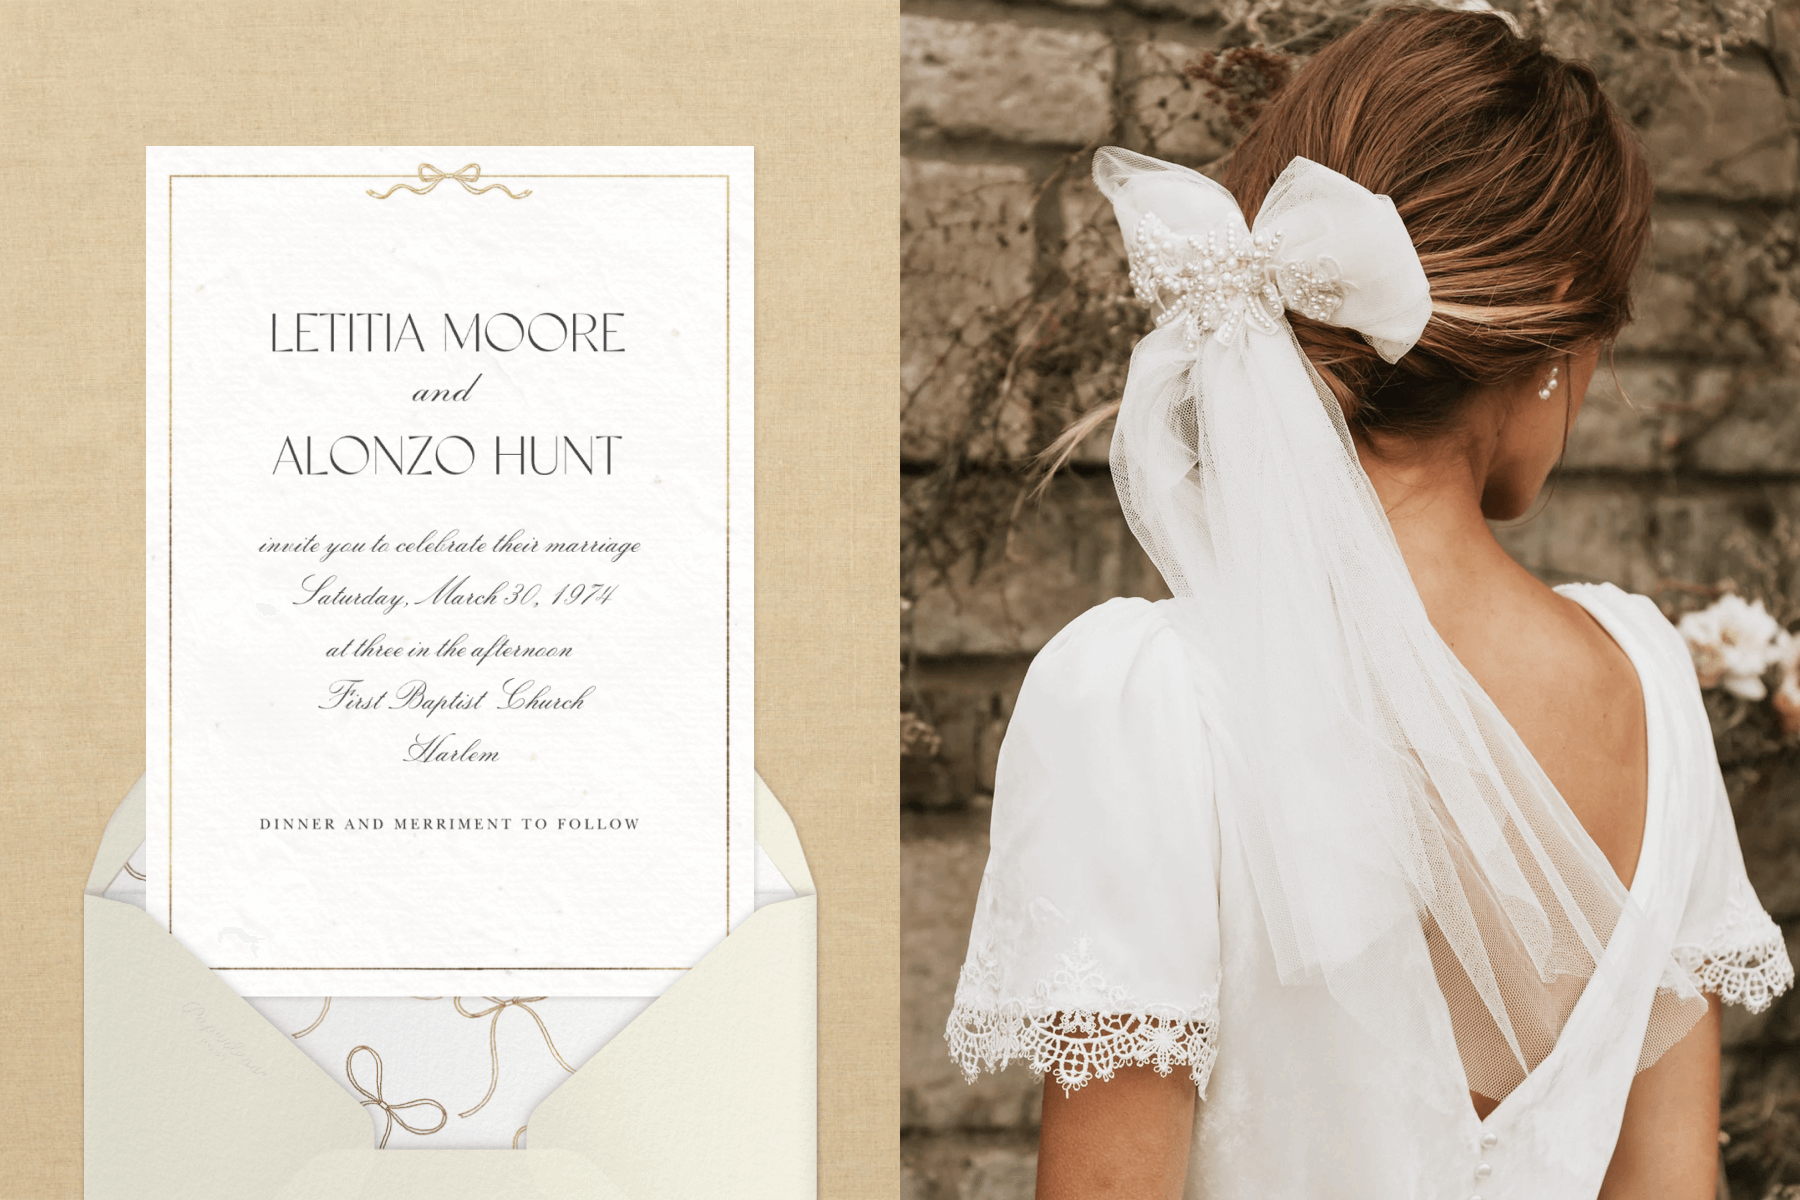 Left: A formal wedding invitation with a bow border; Right: Viewed from behind, a person wears a bow-inspired white veil in their hair.